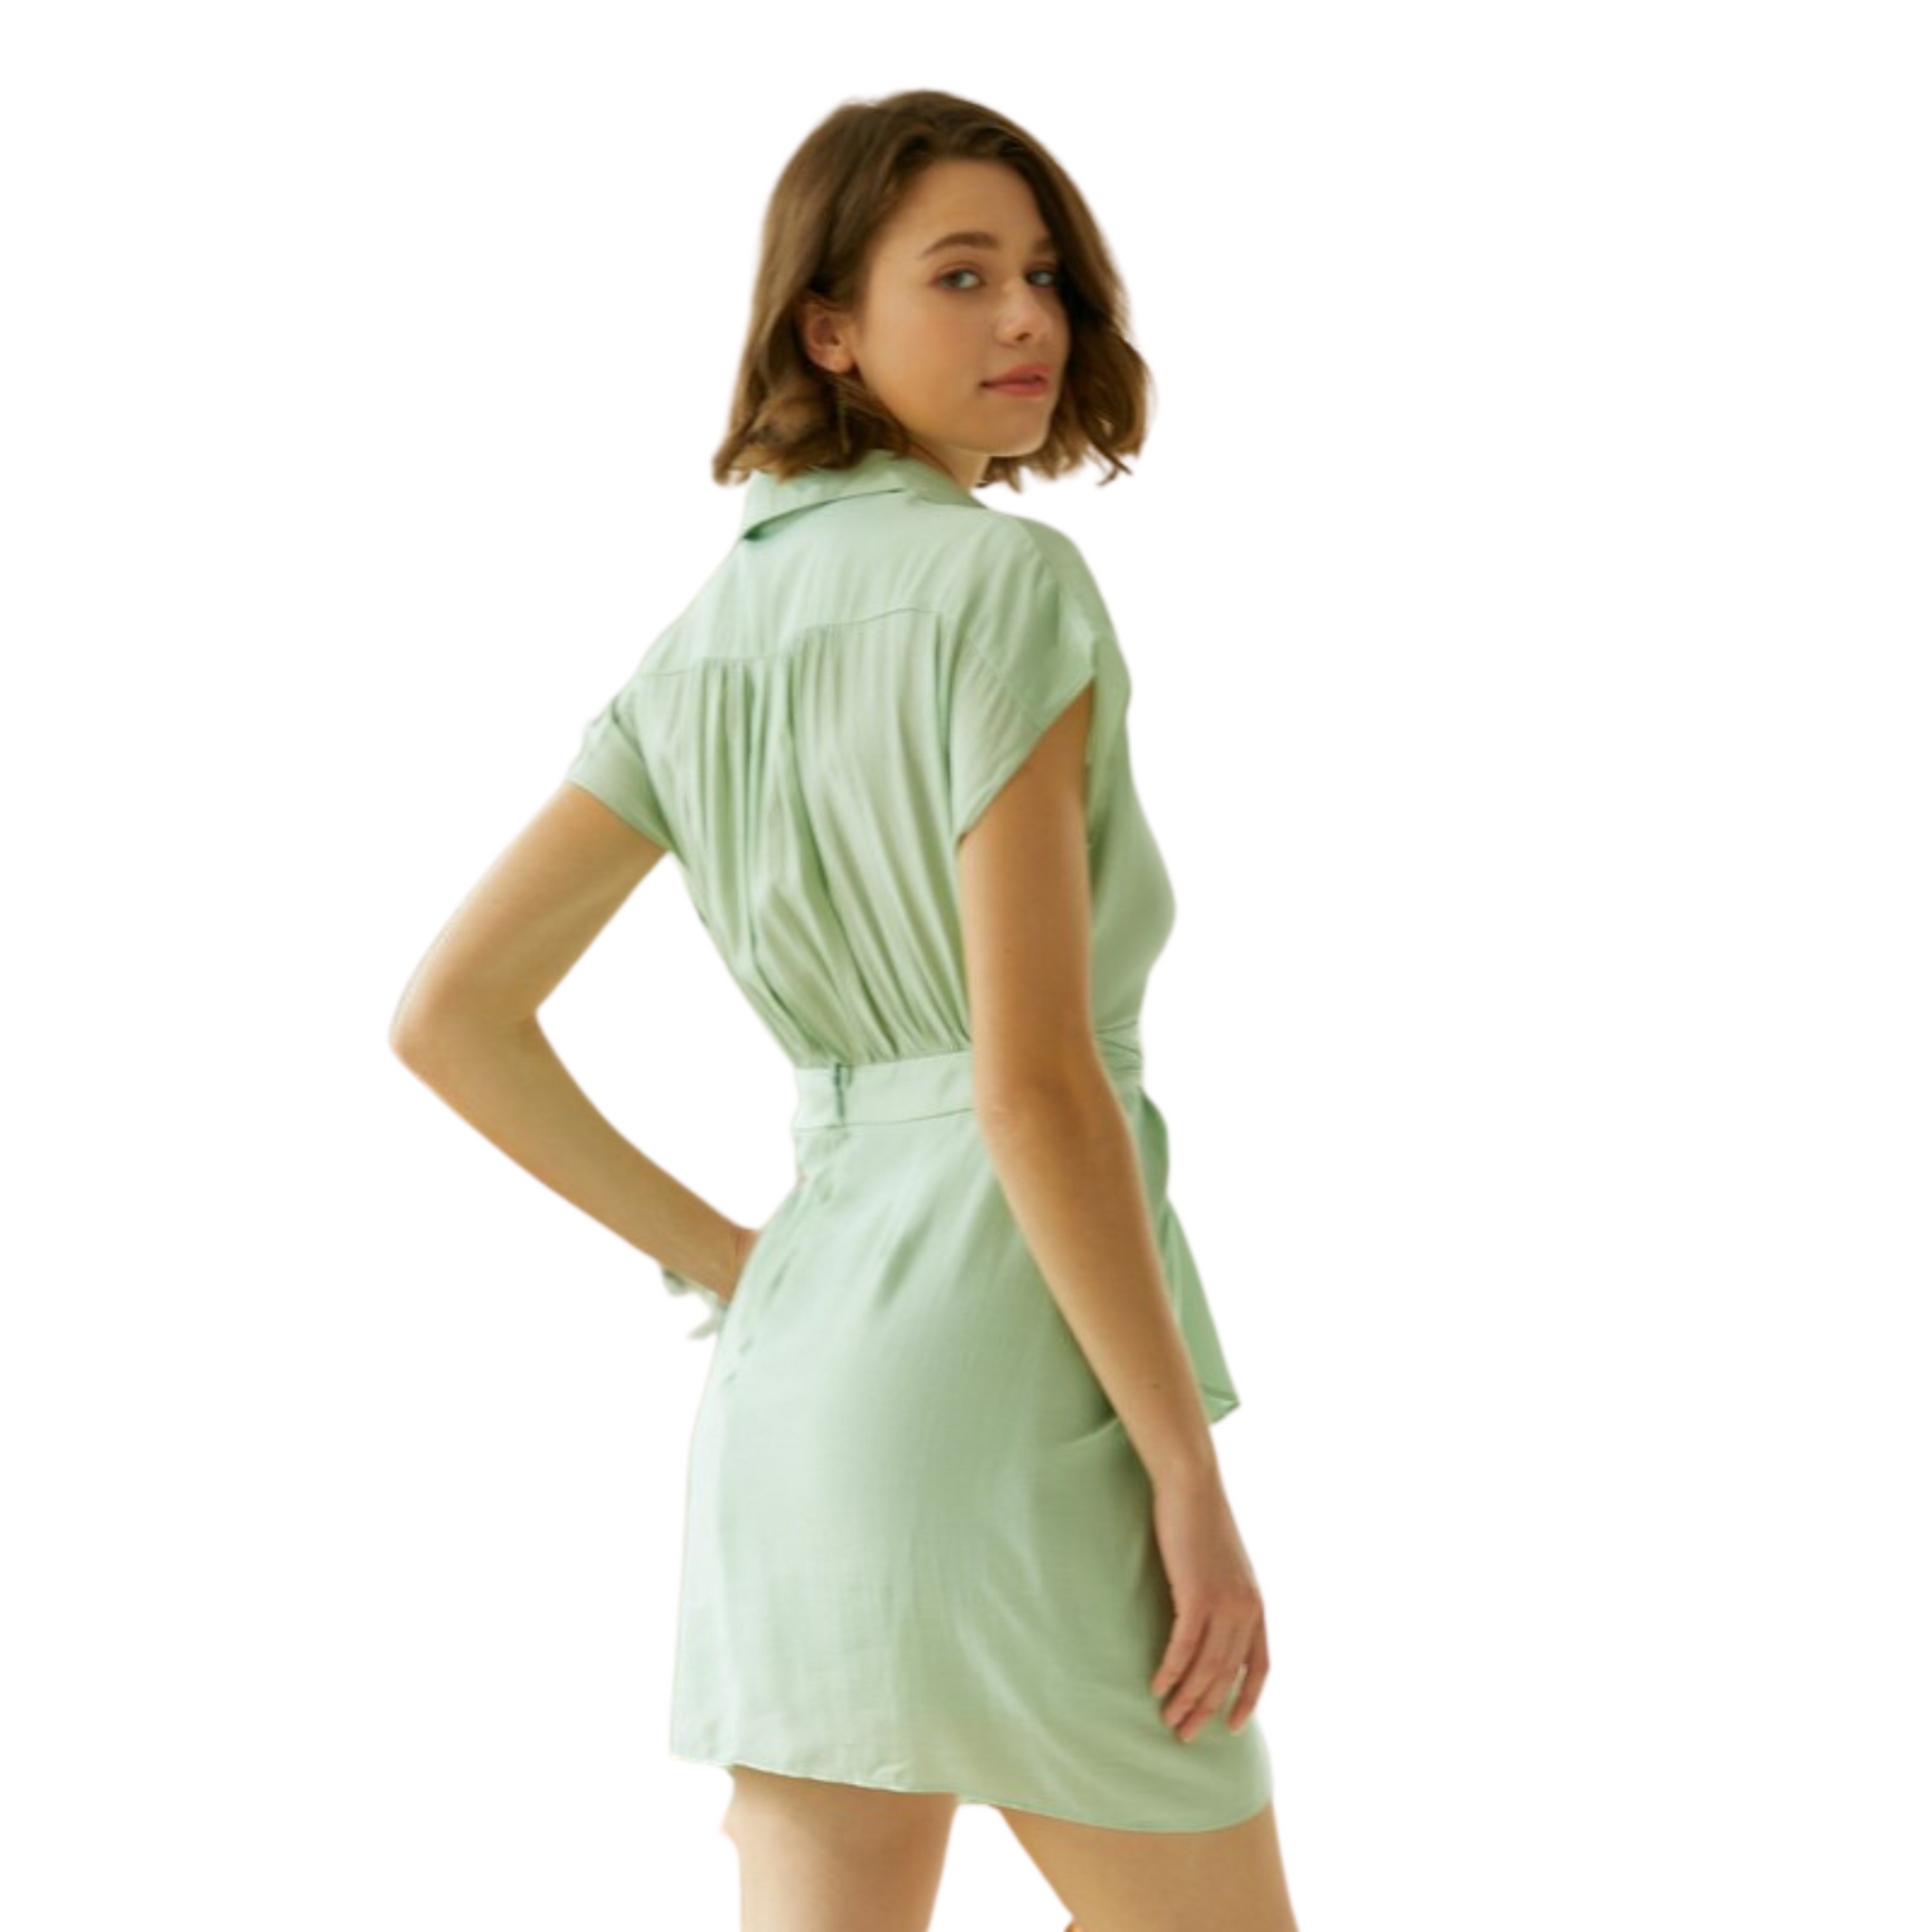 The Front Twist Overlay Dress is the perfect summer essential. Crafted in a bright sage color, this mini dress features a stylish twist front overlay and short sleeves for a cool, fashion-forward look. Make a statement this season with this unique piece.